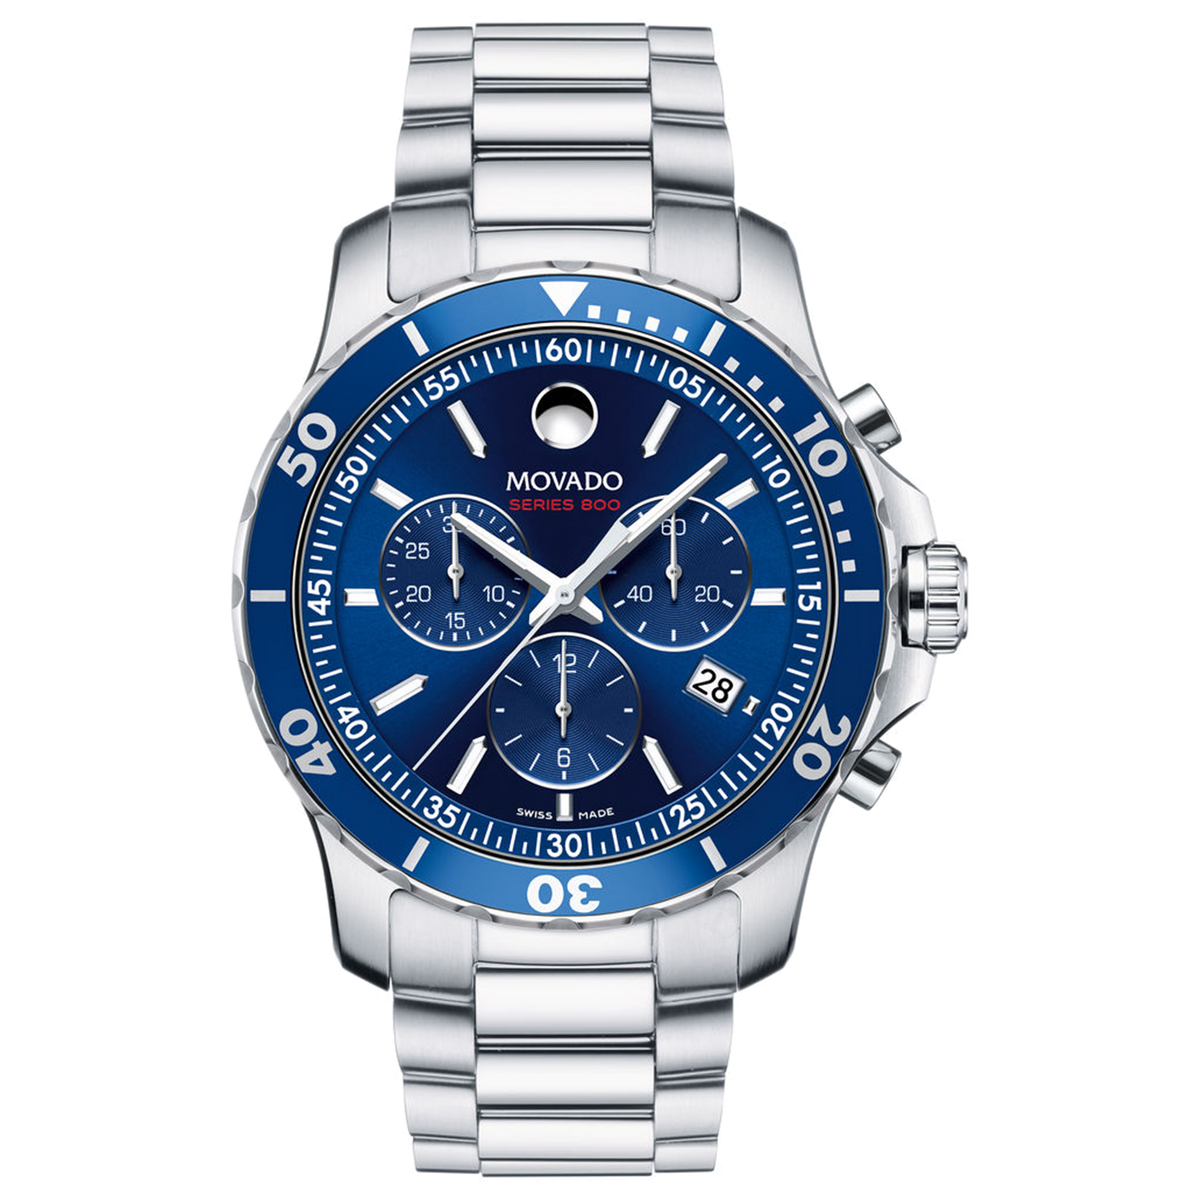 Movado Series 800 Chronograph - Stainless Steel with Blue Dial